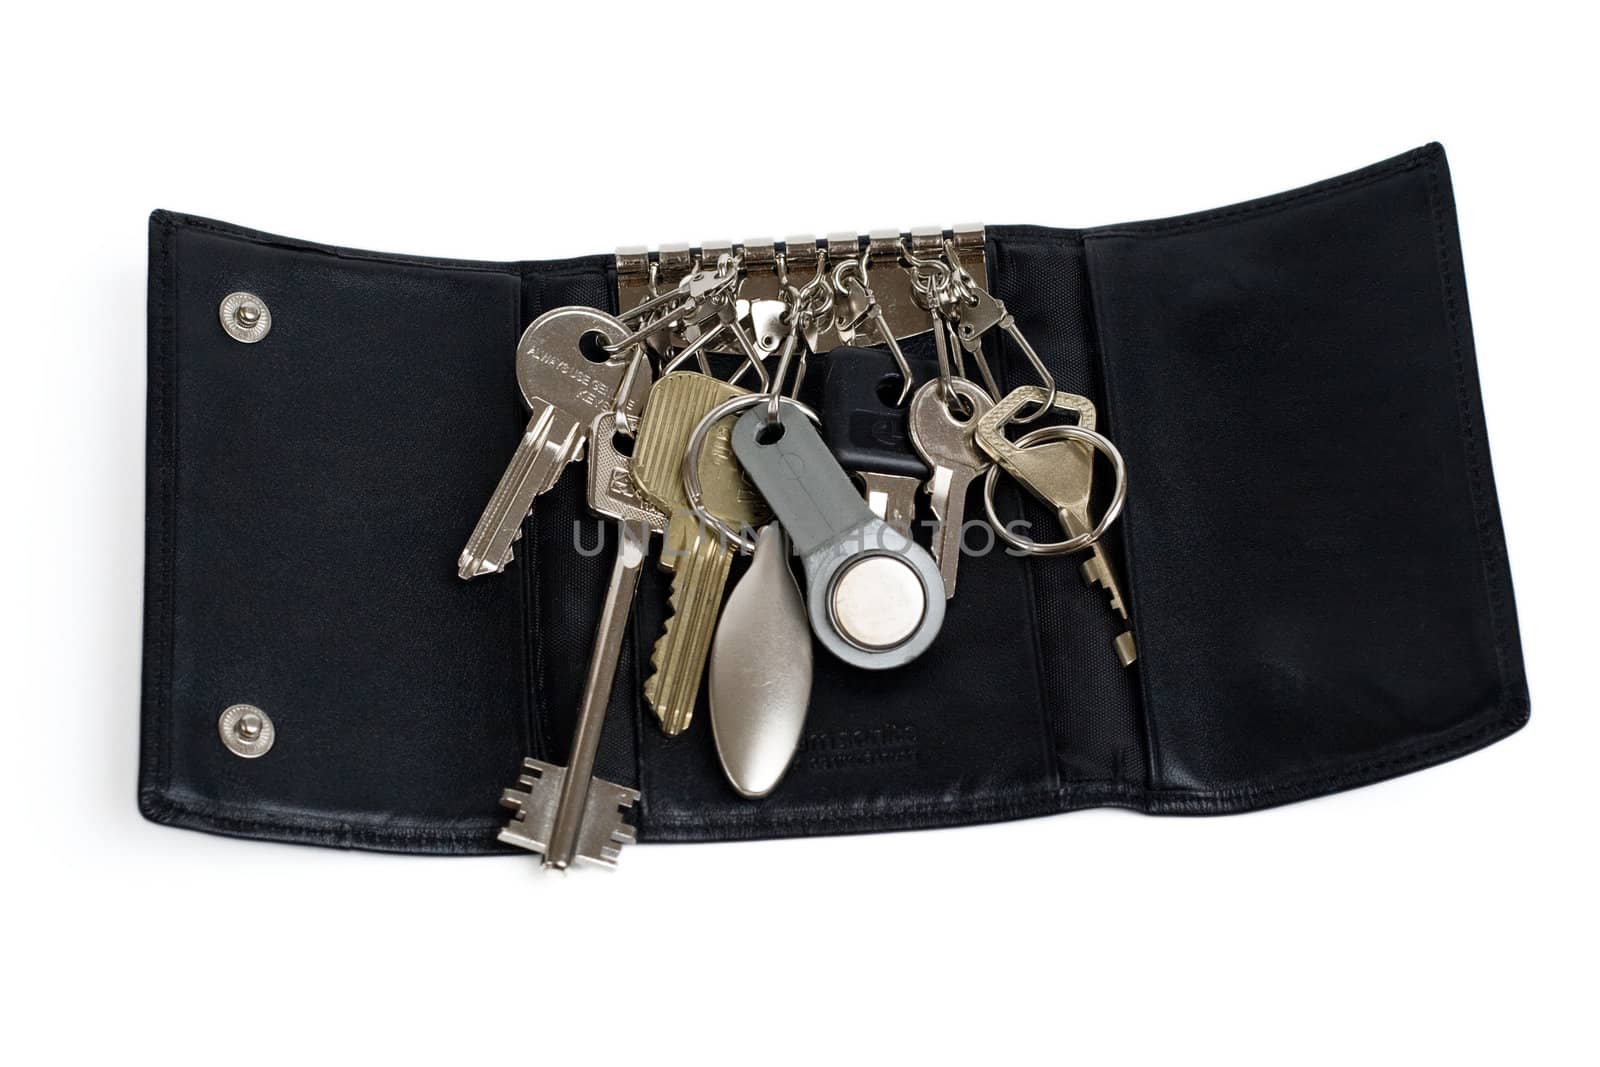 leather key holder with bunch of keys, close-up